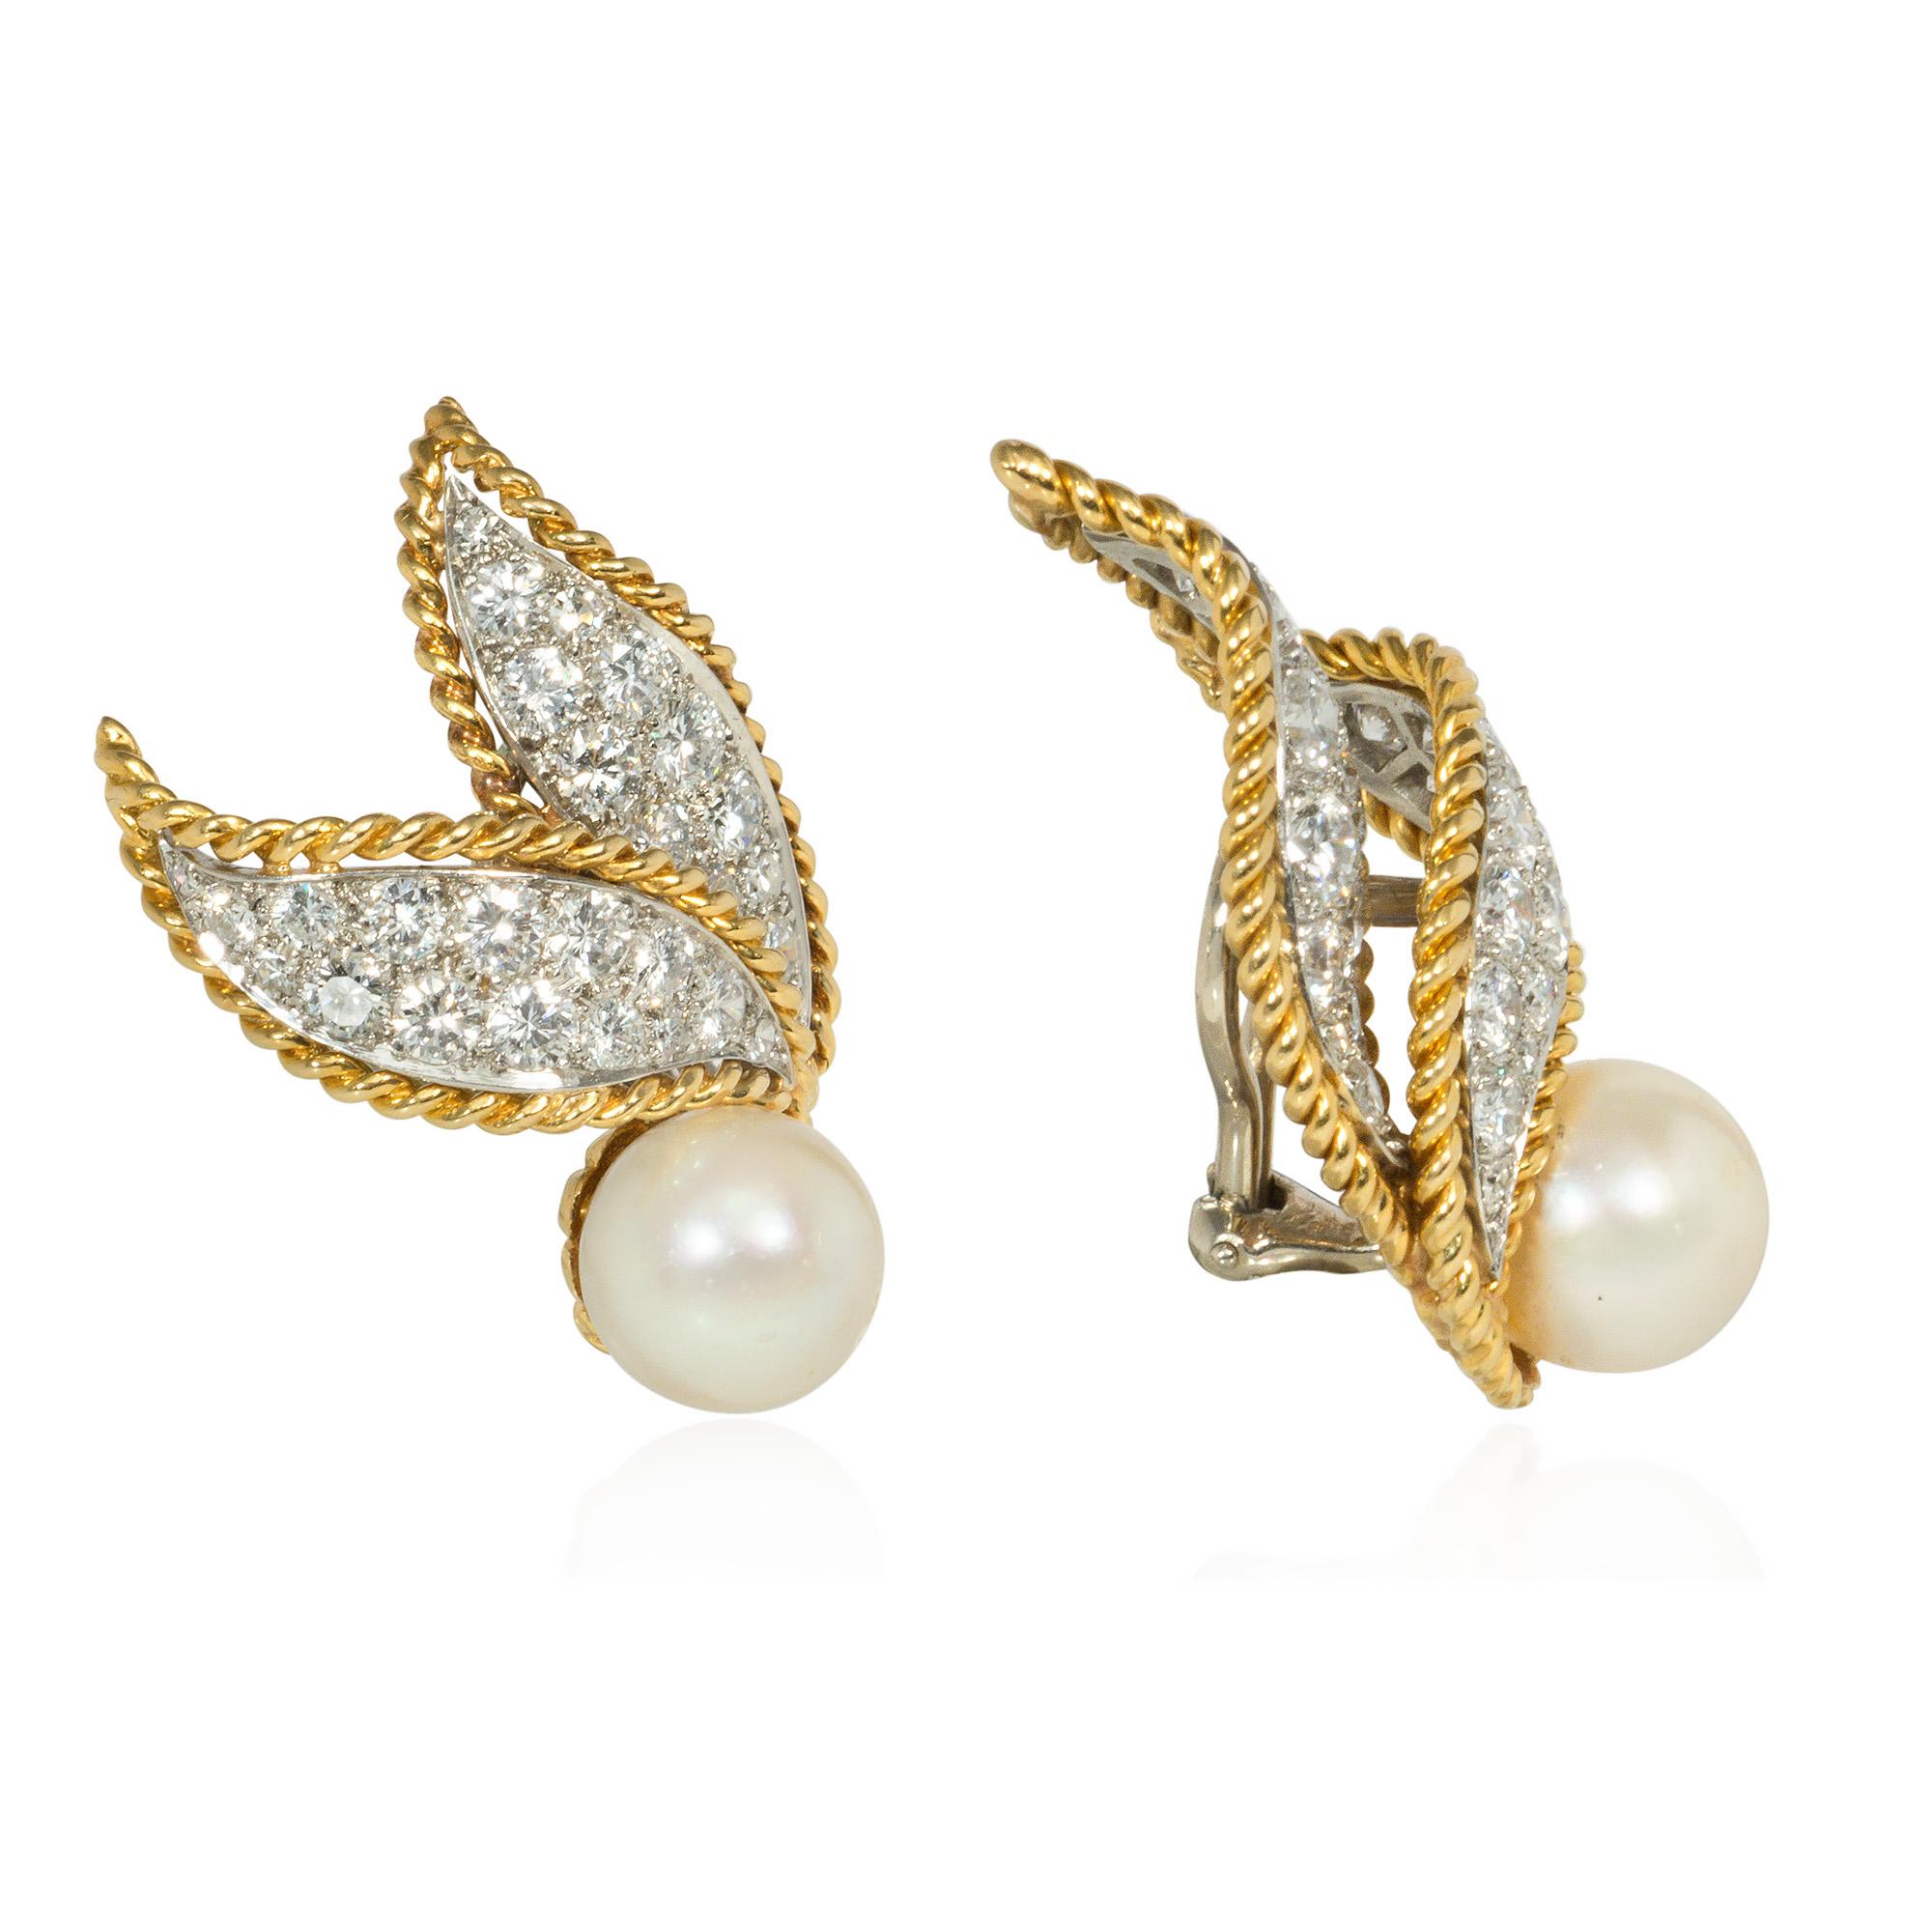 A pair of gold, diamond, and pearl clip earrings, each in the form of two juxtaposed pavé diamond curled leaves with gold rope twist borders and a pearl accent, in 18k and platinum.  Van Cleef & Arpels, #24751.  Atw diamonds 3.25 cts., 
E-F color